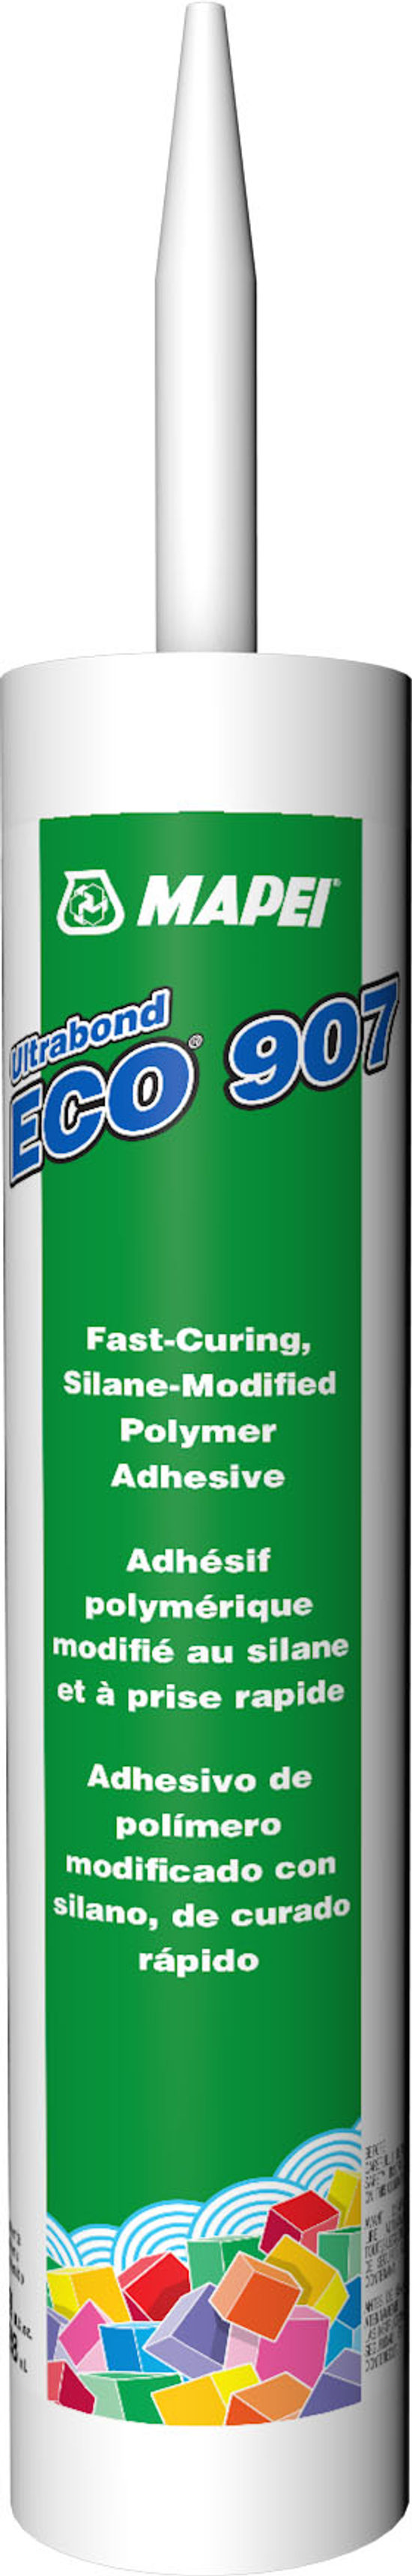 Ultrabond ECO 907 Fast-Curing Silane-Modified Polymer Adhesive - 858 mL